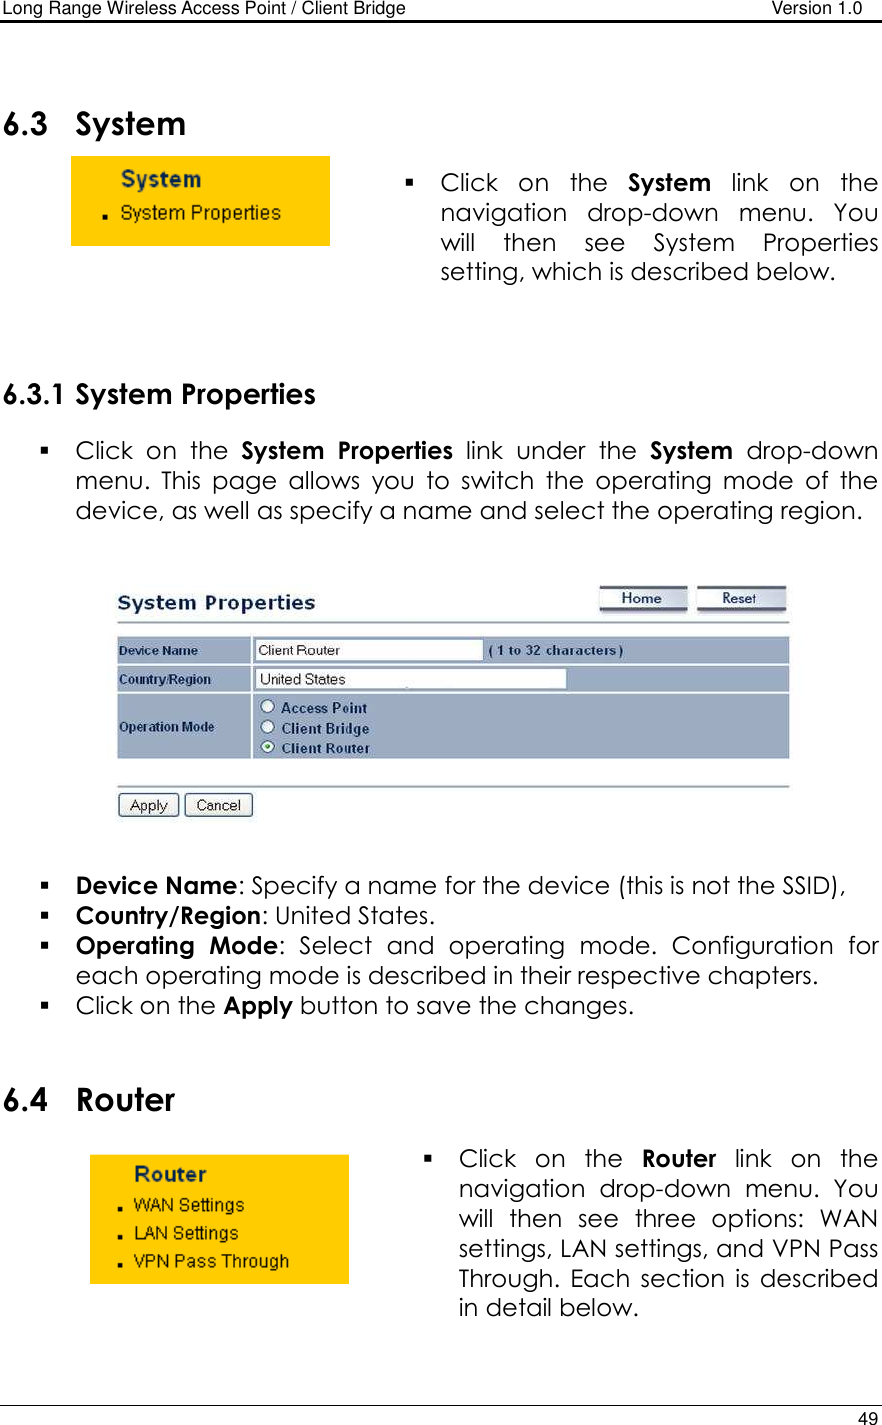 Long Range Wireless Access Point / Client Bridge                                   Version 1.0    49     6.3 System   Click  on  the  System  link  on  the navigation  drop-down  menu.  You will  then  see  System  Properties setting, which is described below.     6.3.1 System Properties  Click  on  the  System  Properties  link  under  the  System  drop-down menu.  This  page  allows  you  to  switch  the  operating  mode  of  the device, as well as specify a name and select the operating region.      Device Name: Specify a name for the device (this is not the SSID),  Country/Region: United States.  Operating  Mode:  Select  and  operating  mode.  Configuration  for each operating mode is described in their respective chapters.   Click on the Apply button to save the changes.    6.4 Router   Click  on  the  Router  link  on  the navigation  drop-down  menu.  You will  then  see  three  options:  WAN settings, LAN settings, and VPN Pass Through.  Each  section  is  described in detail below.     